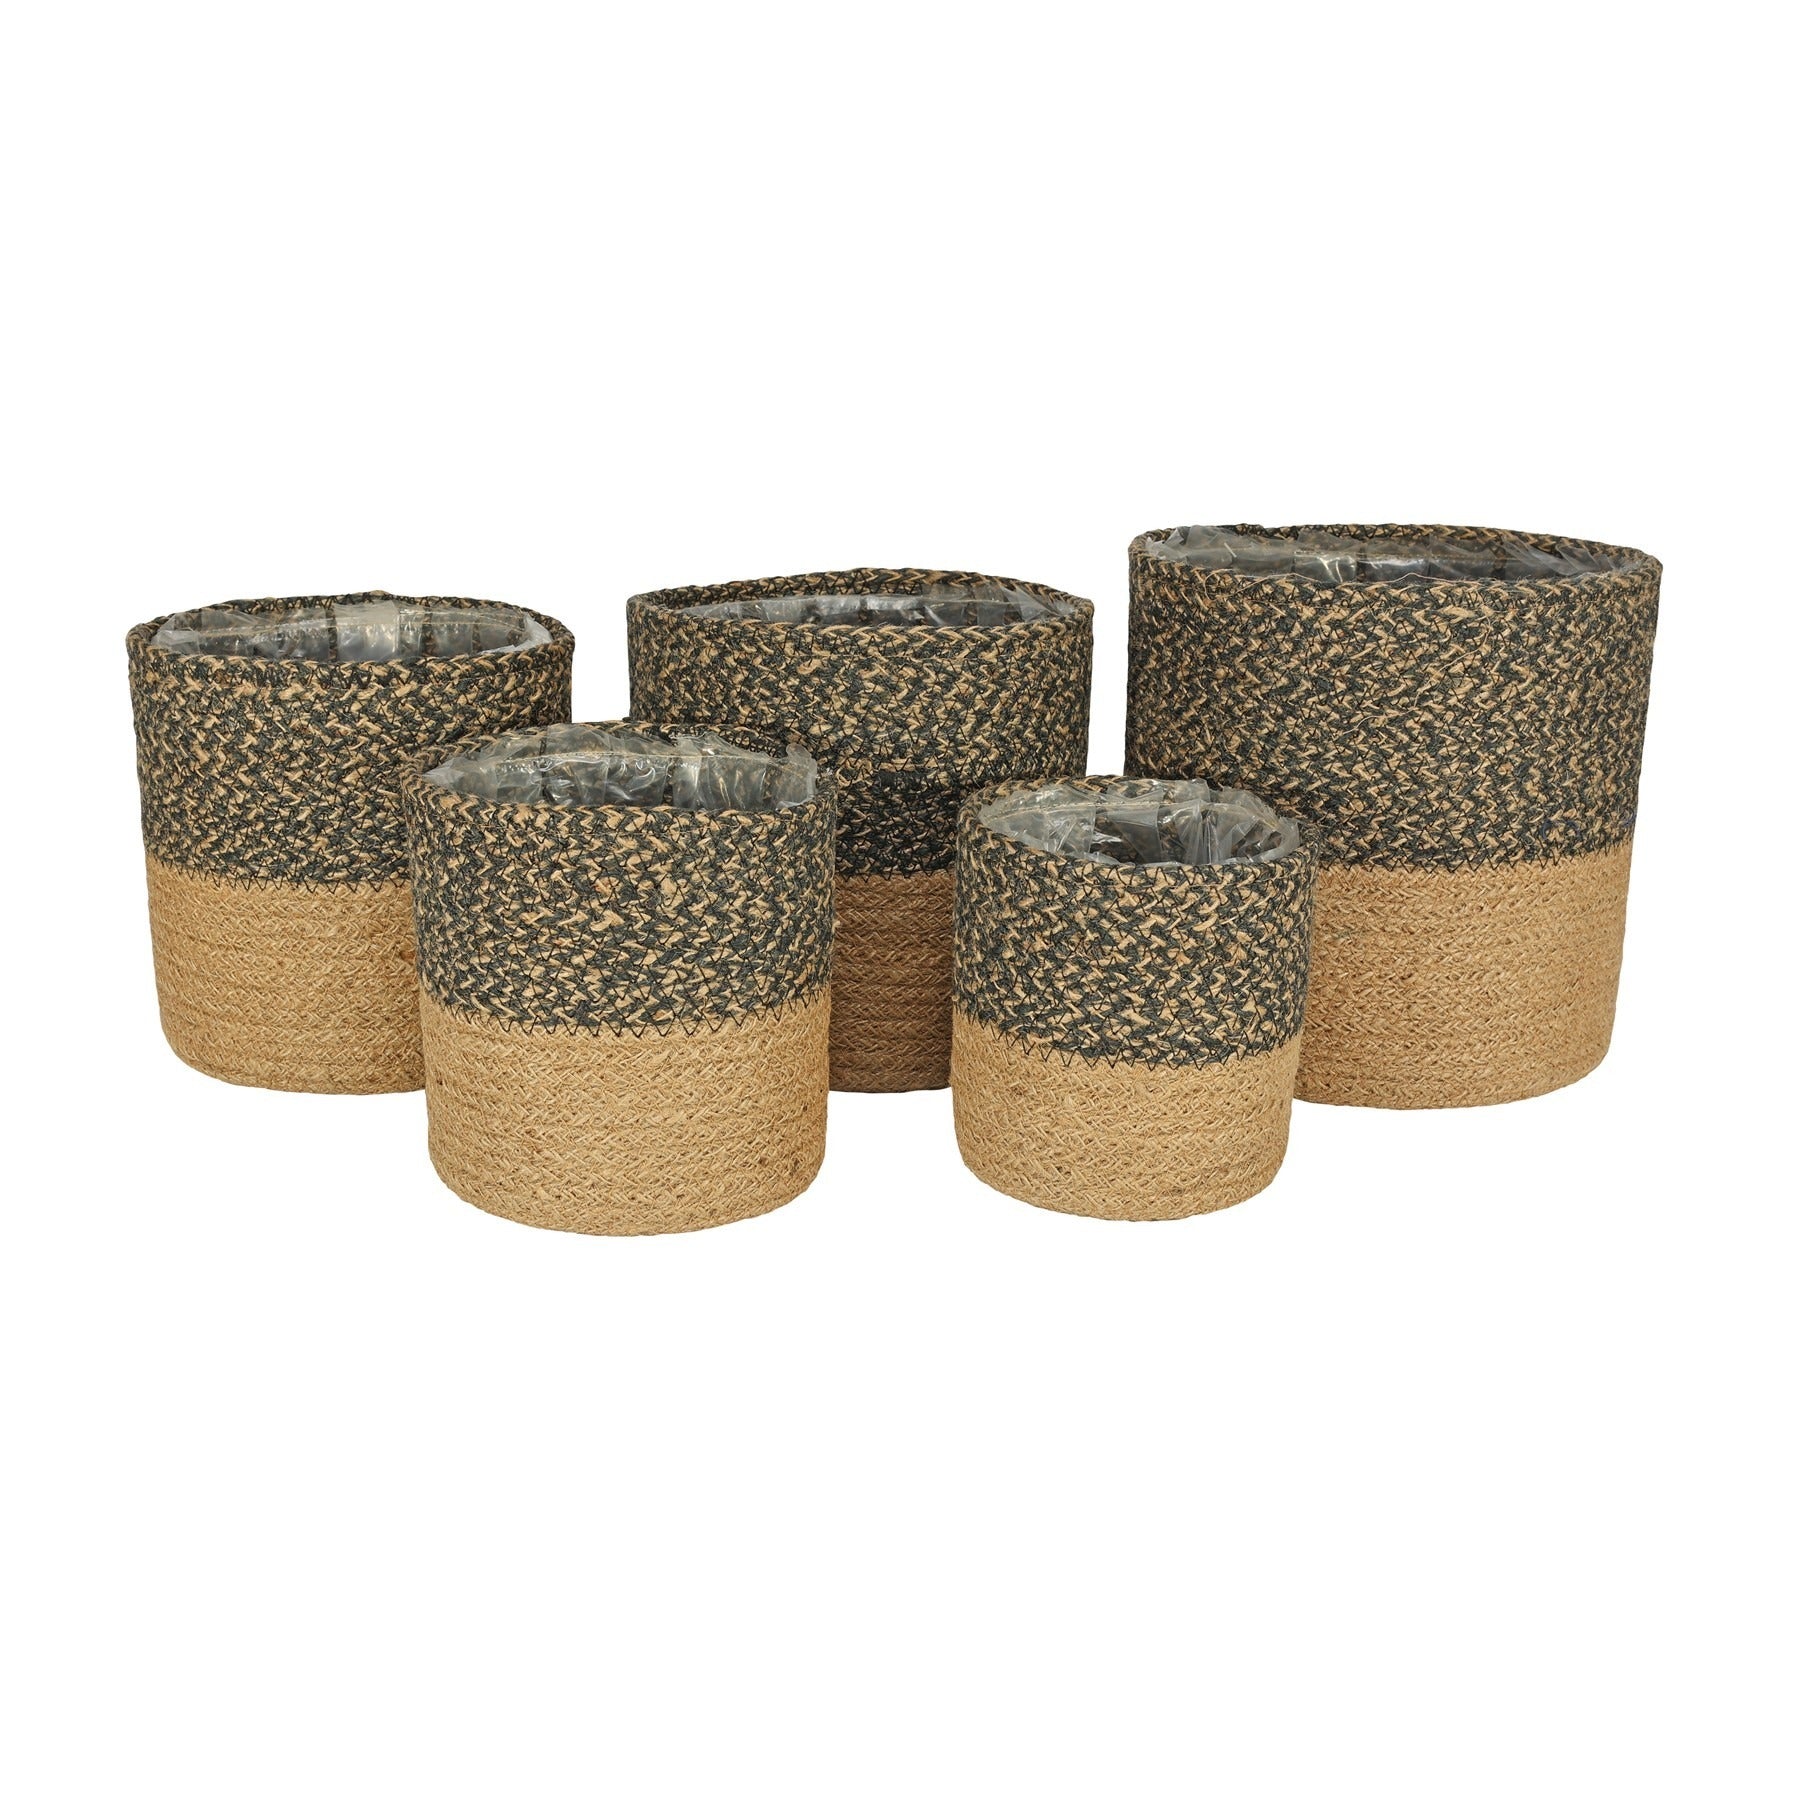 View Set of 5 Jute Basket with Liner Two Tone information